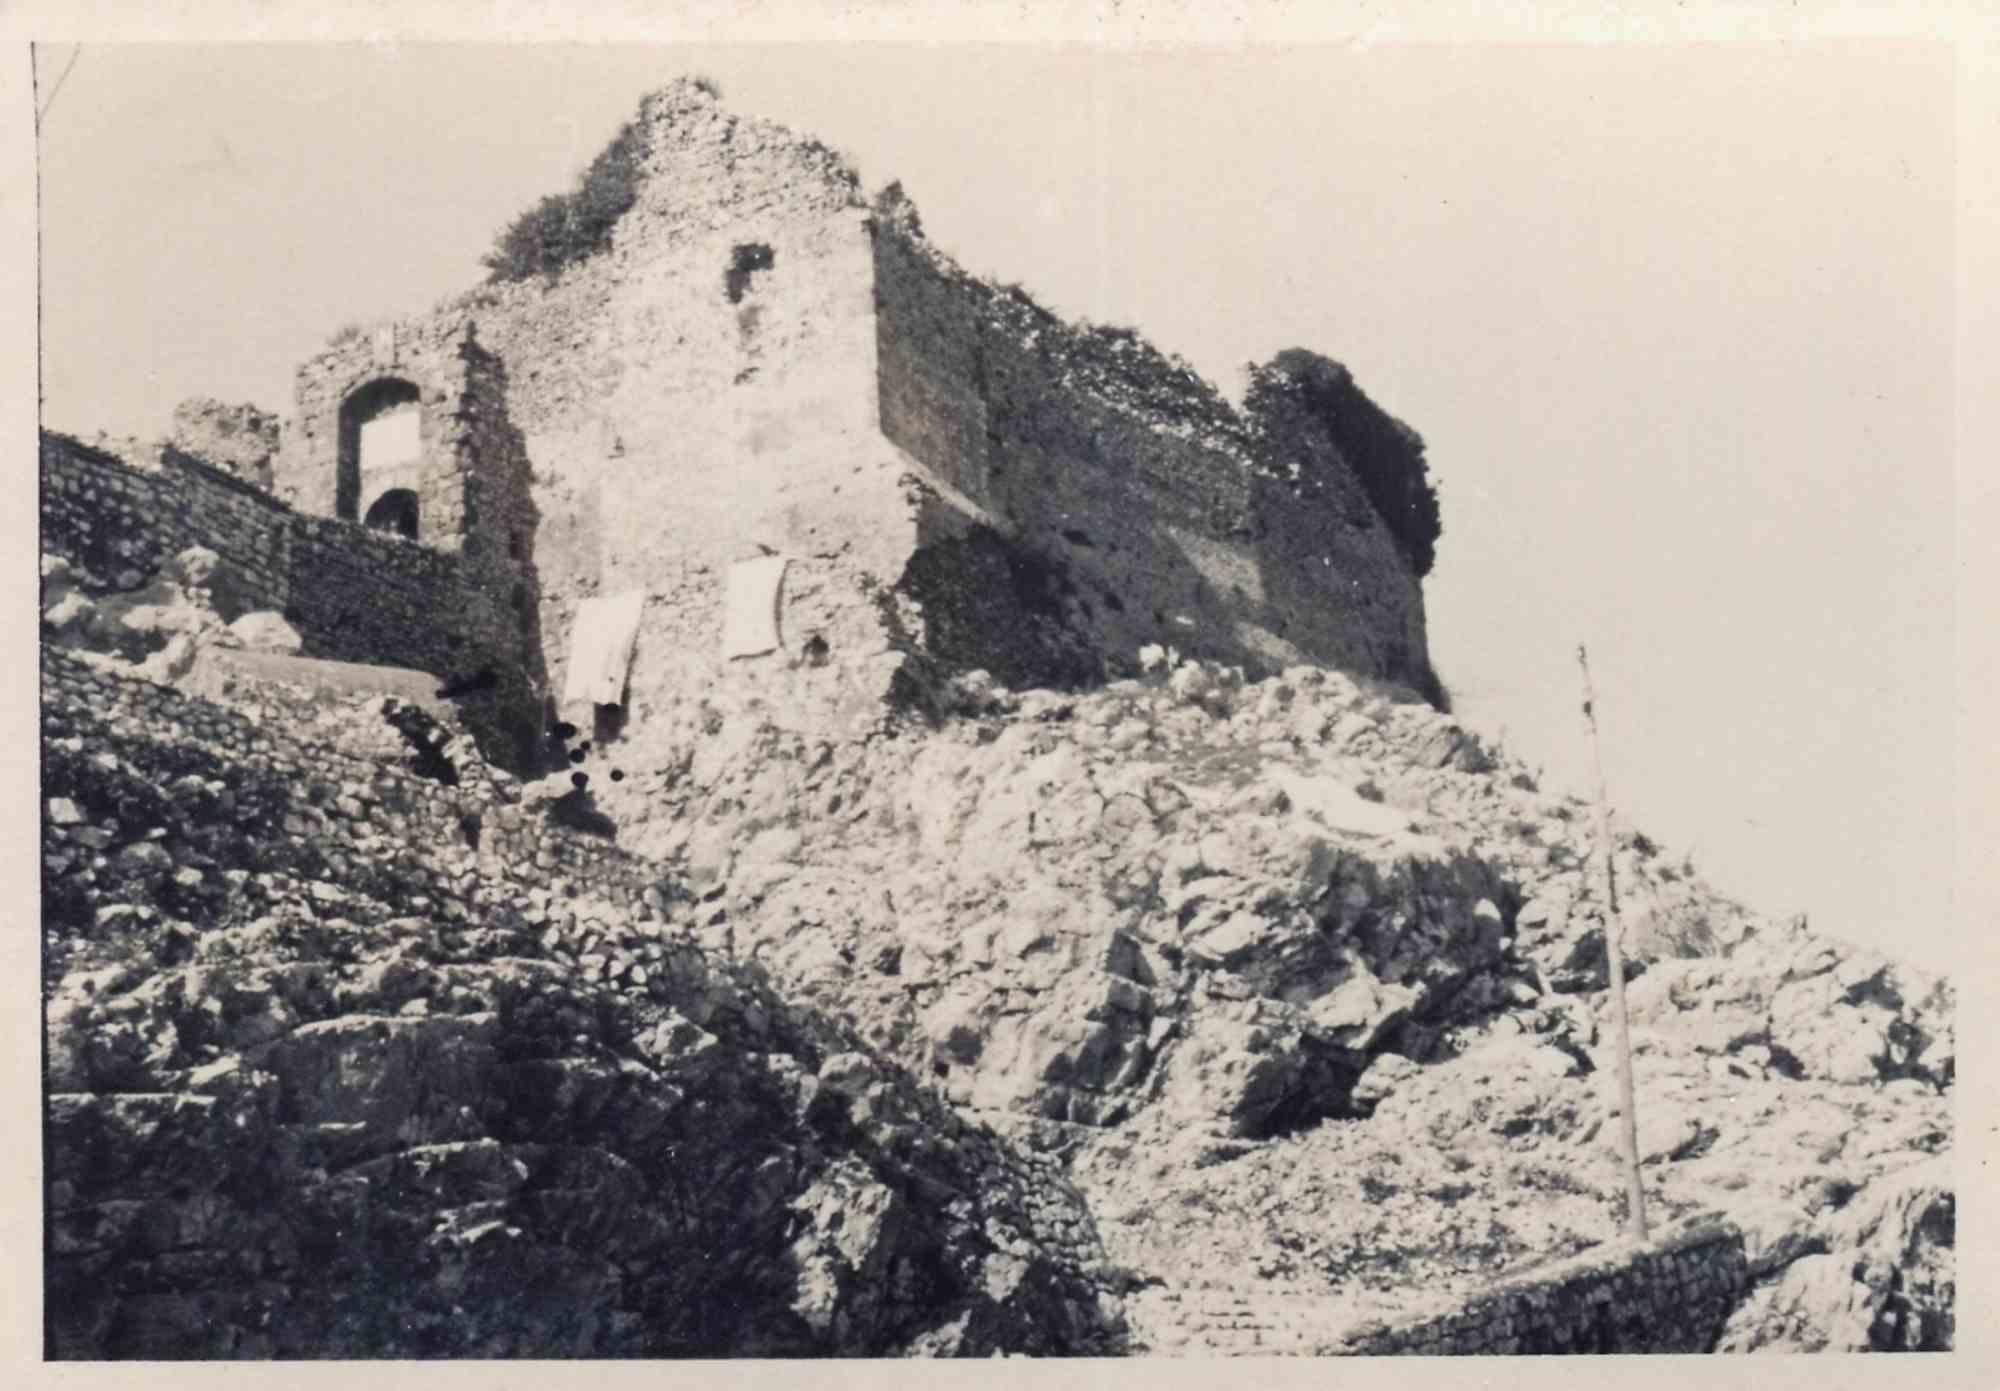 Unknown Landscape Photograph - Old Days Photo - Old Burg - Vintage Photo - Early 20th Century